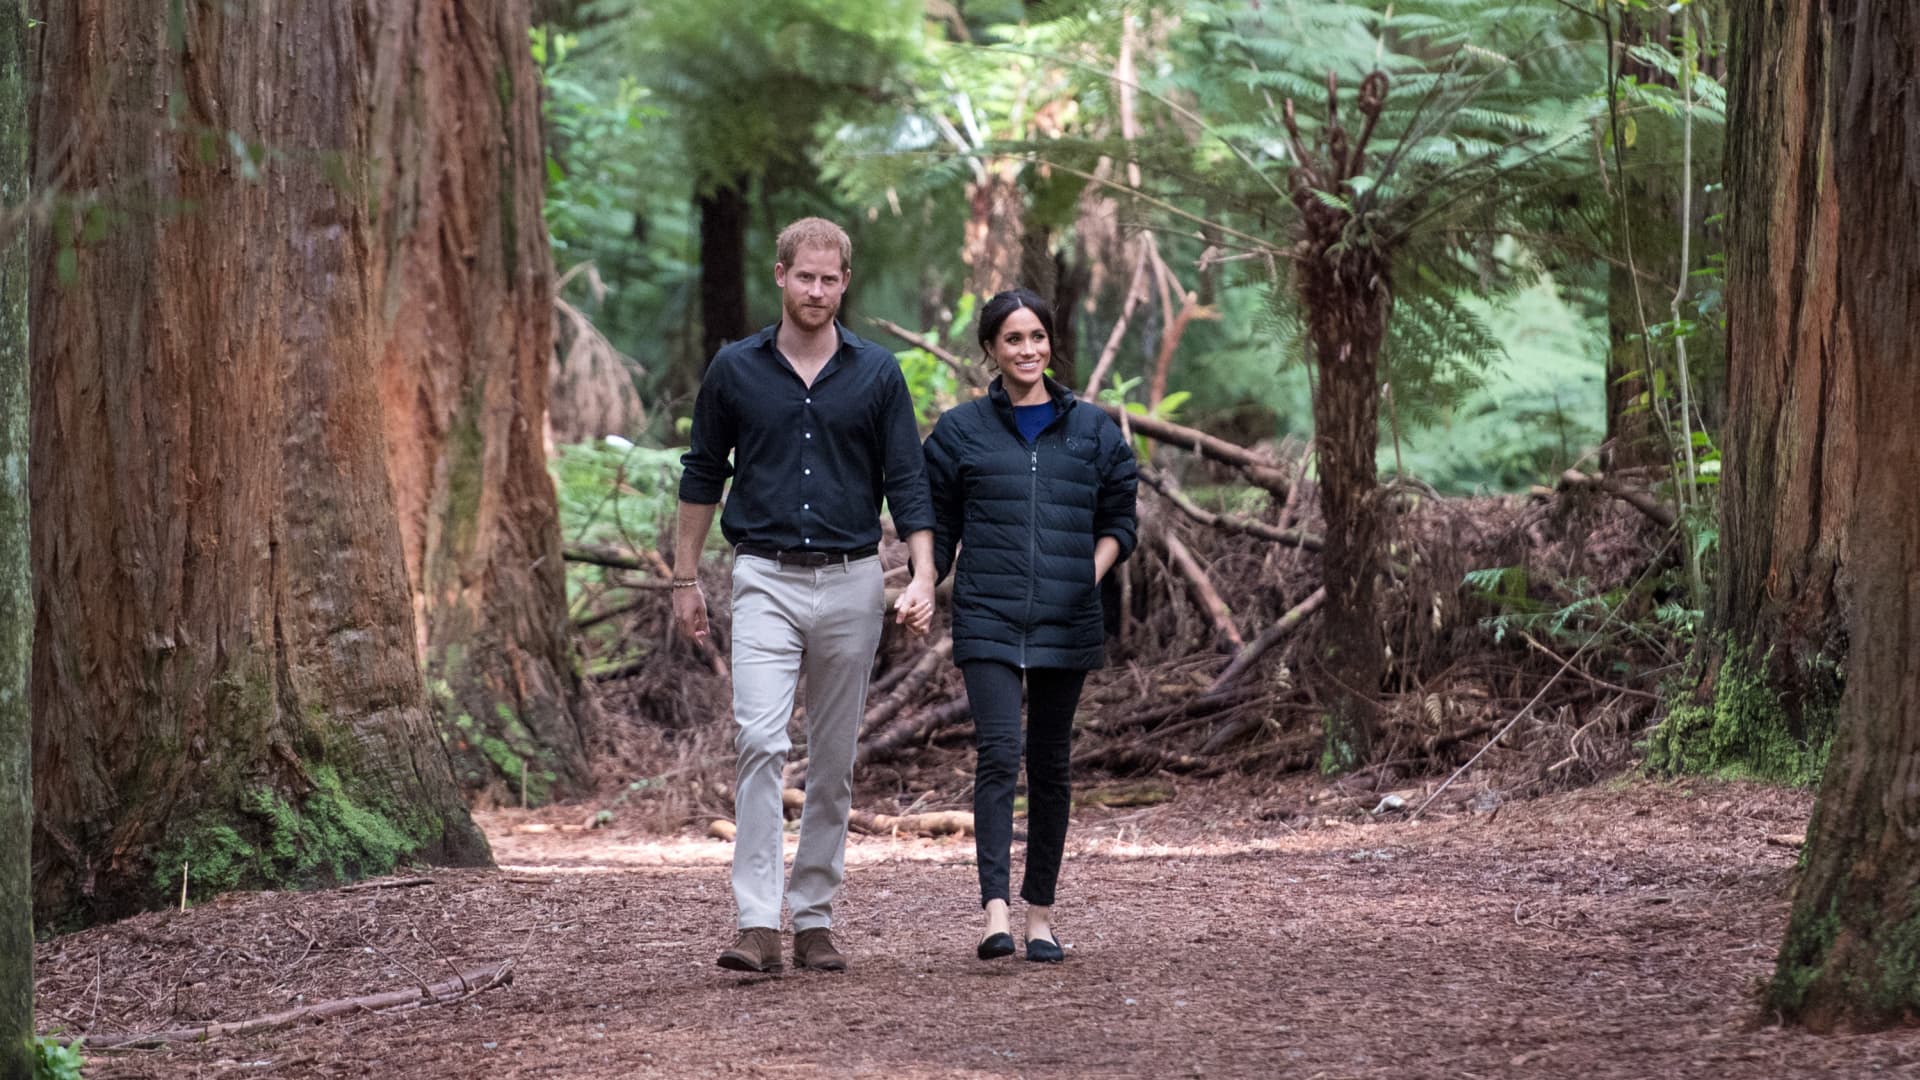 Prince Harry, Duke of Sussex, and Meghan, Duchess of Sussex, visit Redwoods Tree Walk on Oct. 31, 2018 in Rotorua, New Zealand.